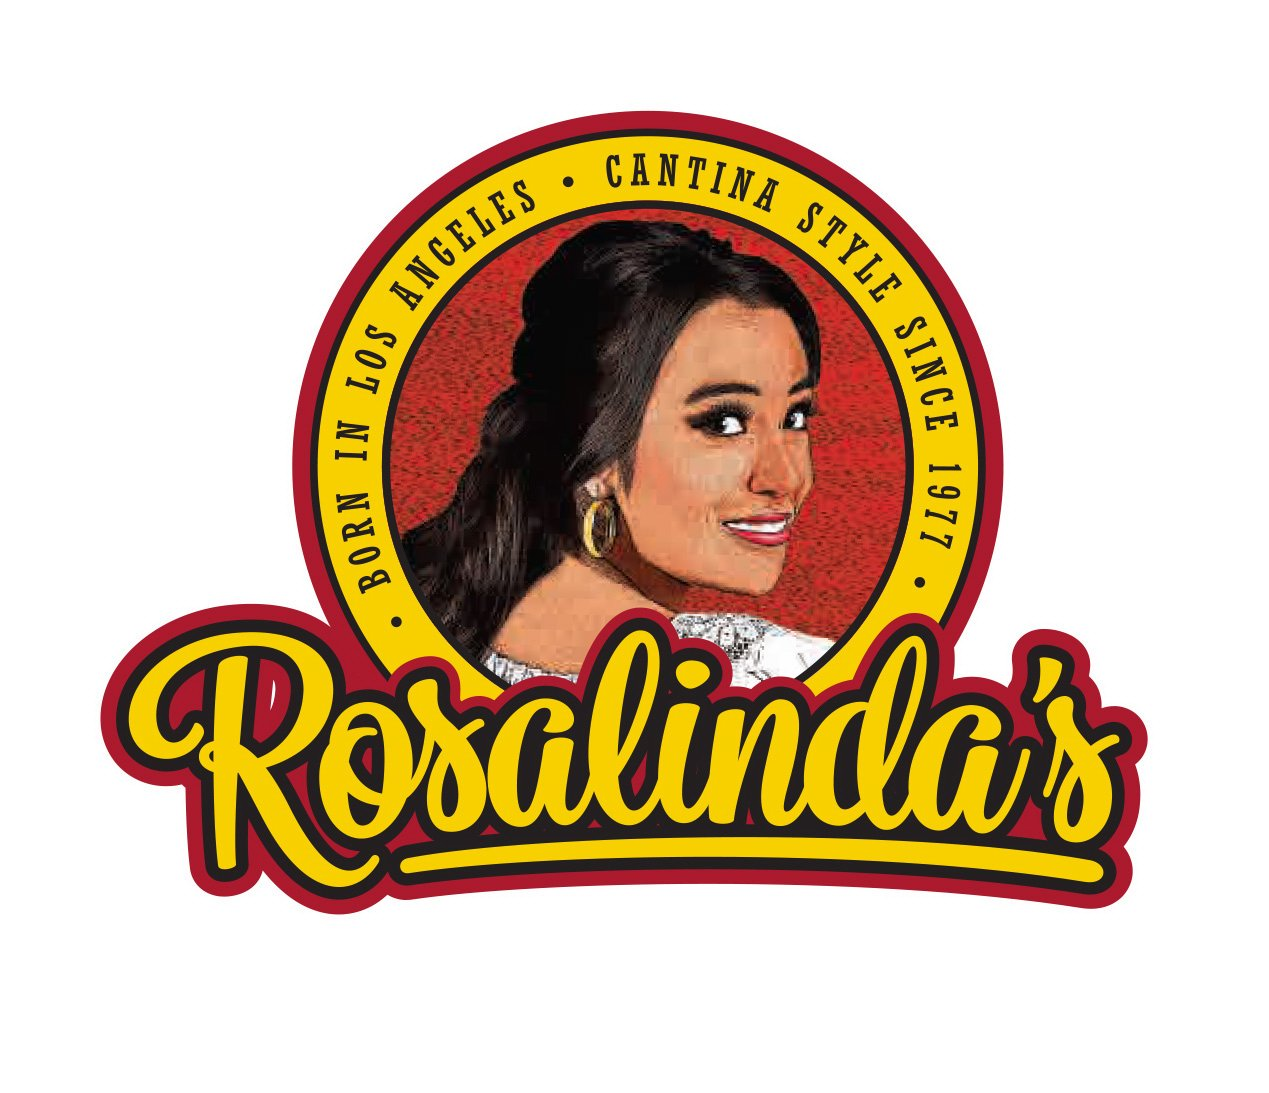  ROSALINDA'S BORN IN LOS ANGELES CANTINA STYLE SINCE 1977